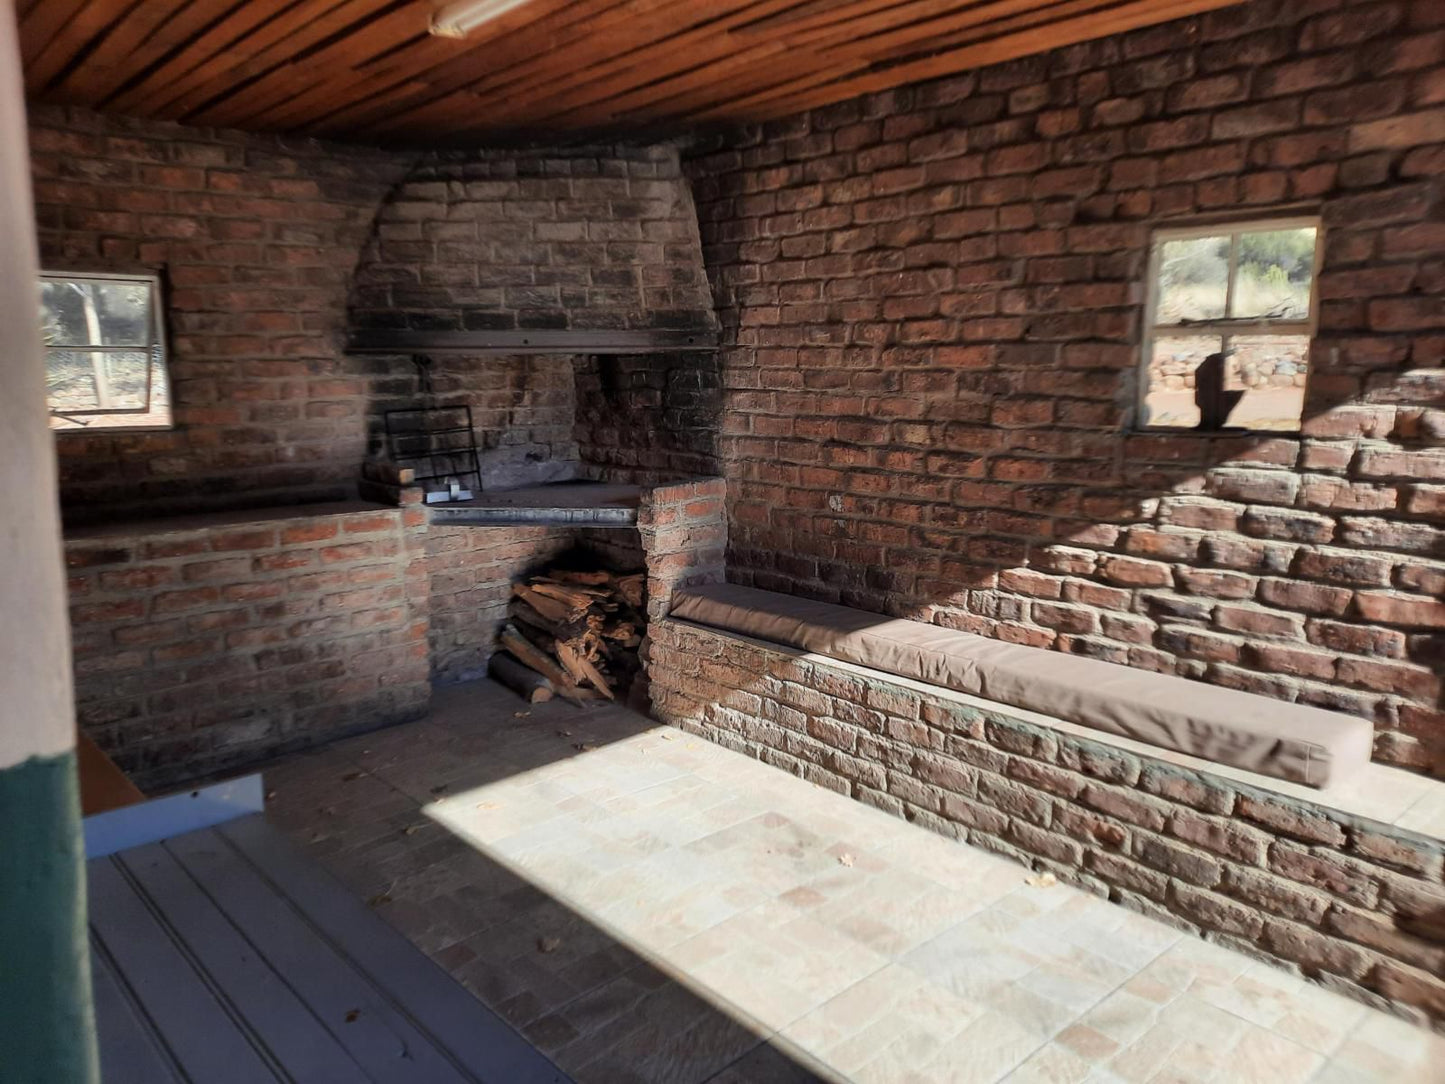 Transkaroo Adventures Noupoort Northern Cape South Africa Cabin, Building, Architecture, Fireplace, Wall, Brick Texture, Texture